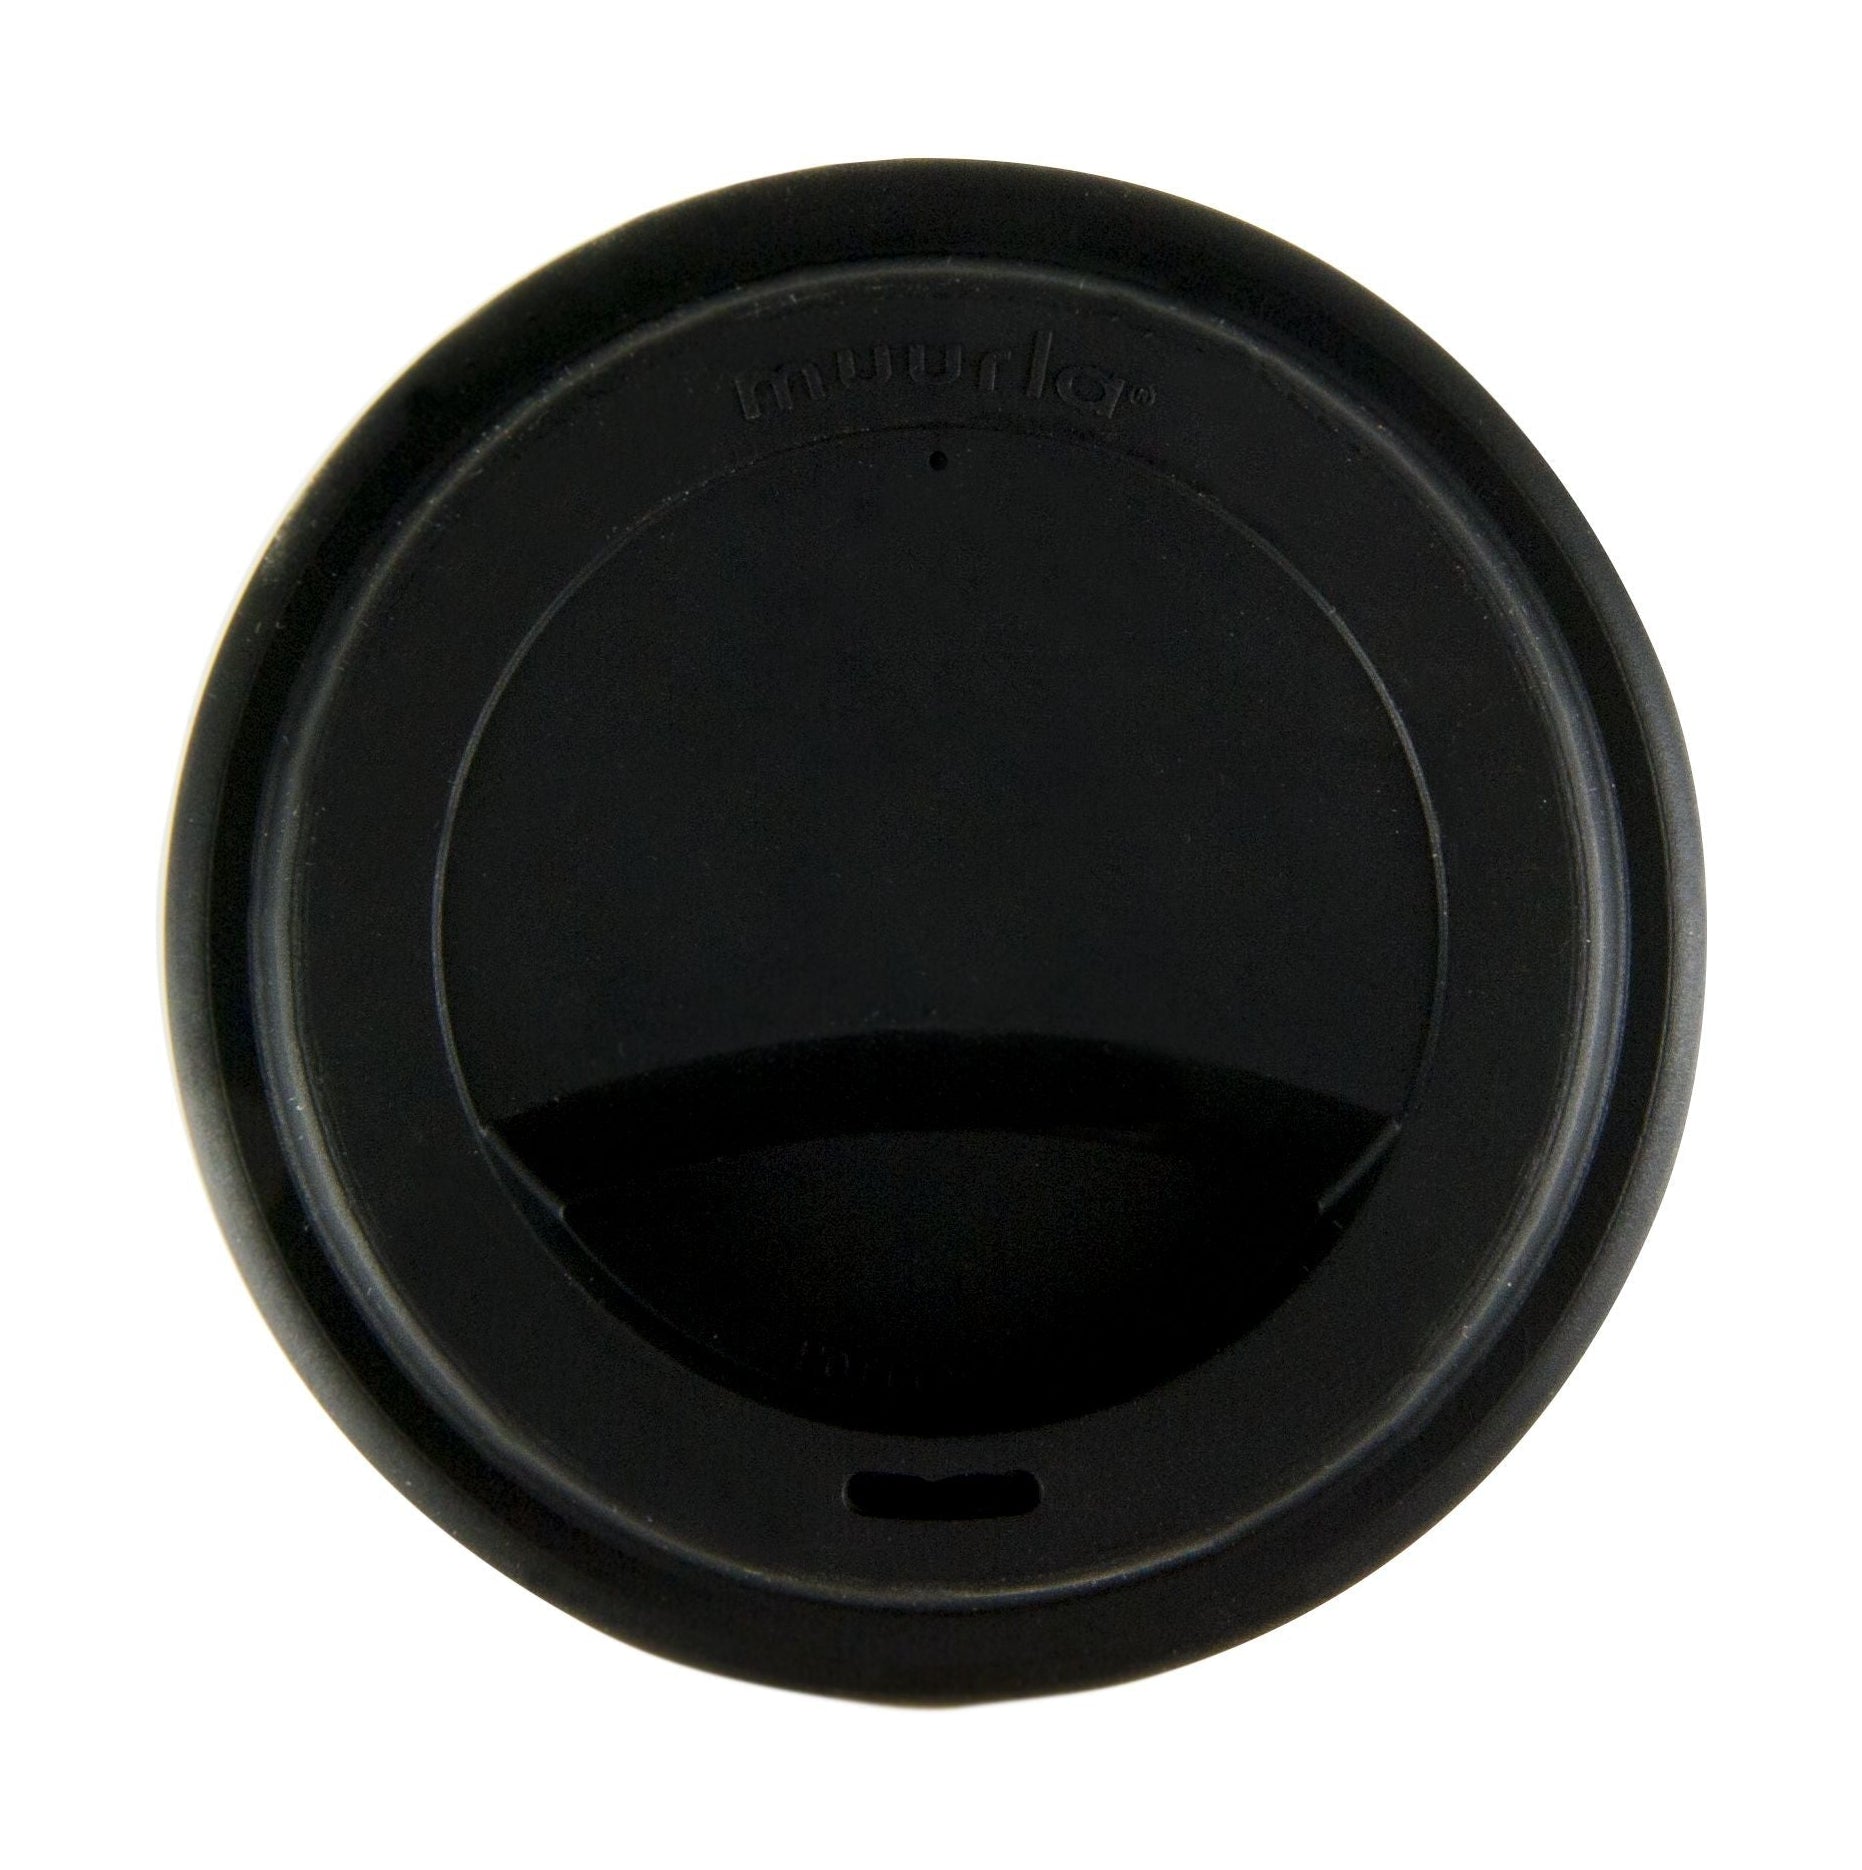 Muurla Silicone Take A Way Lid For Coffee